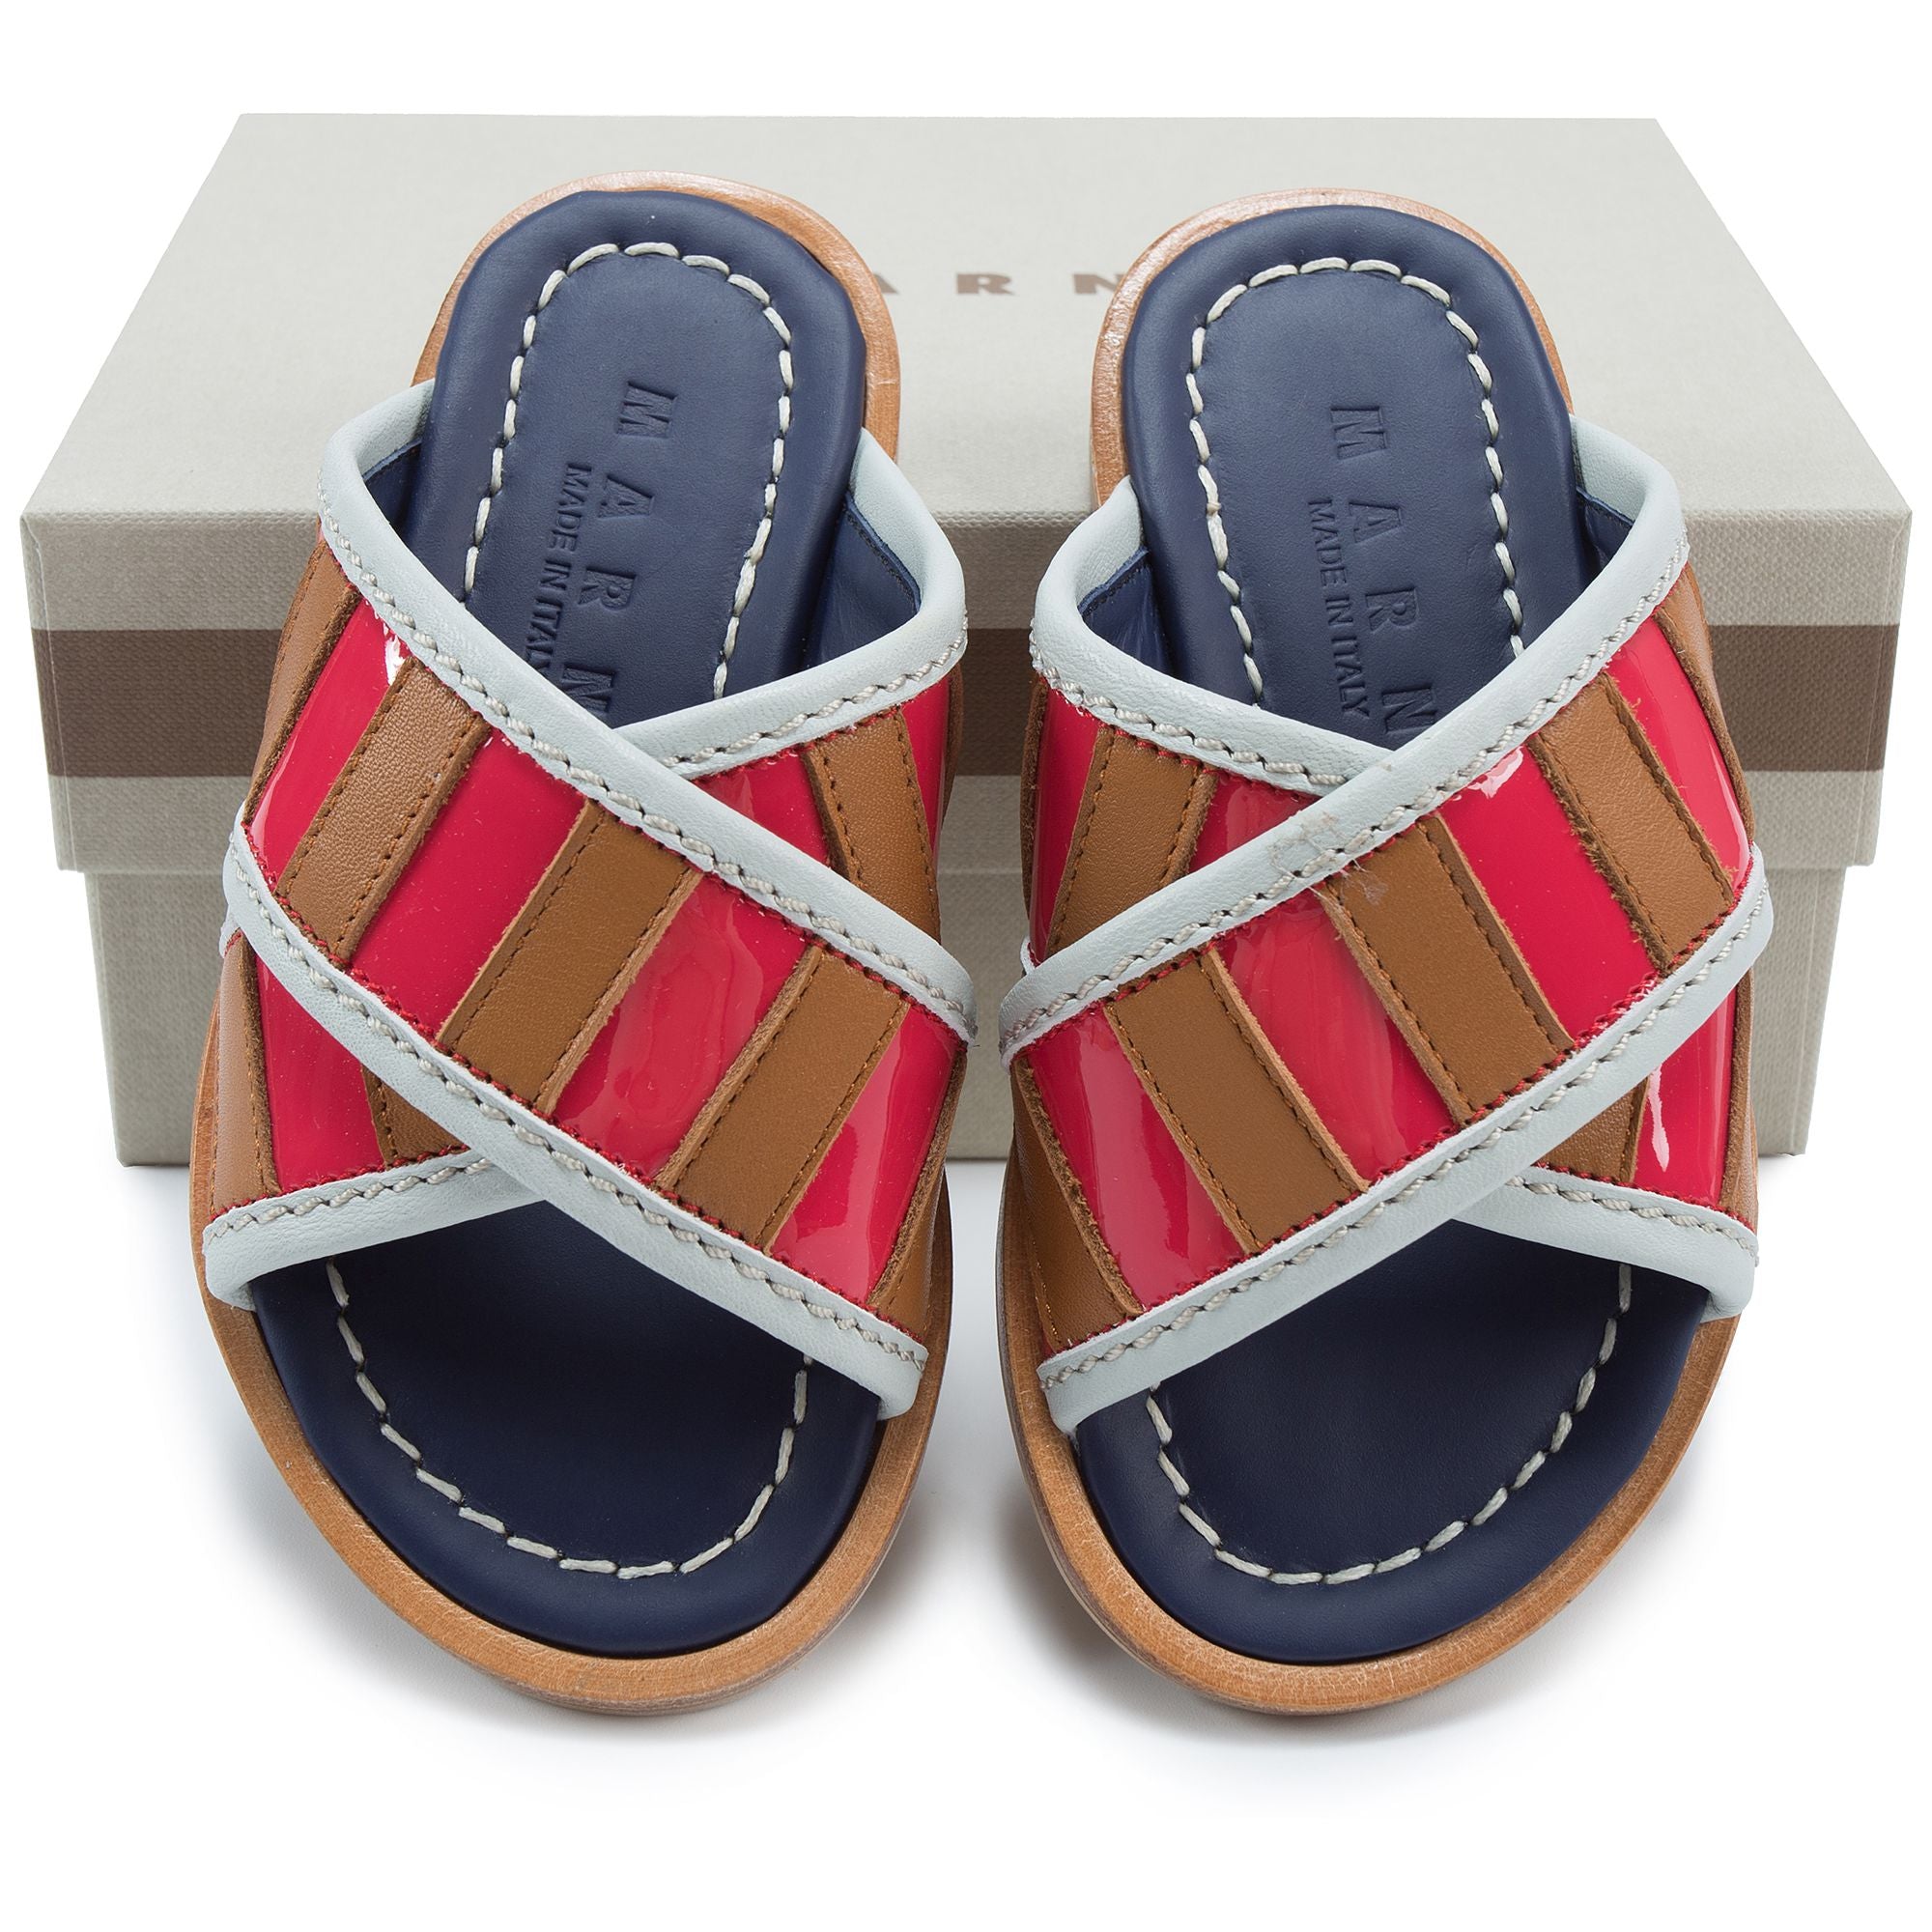 Girls Brown & Pink Leather Sandals